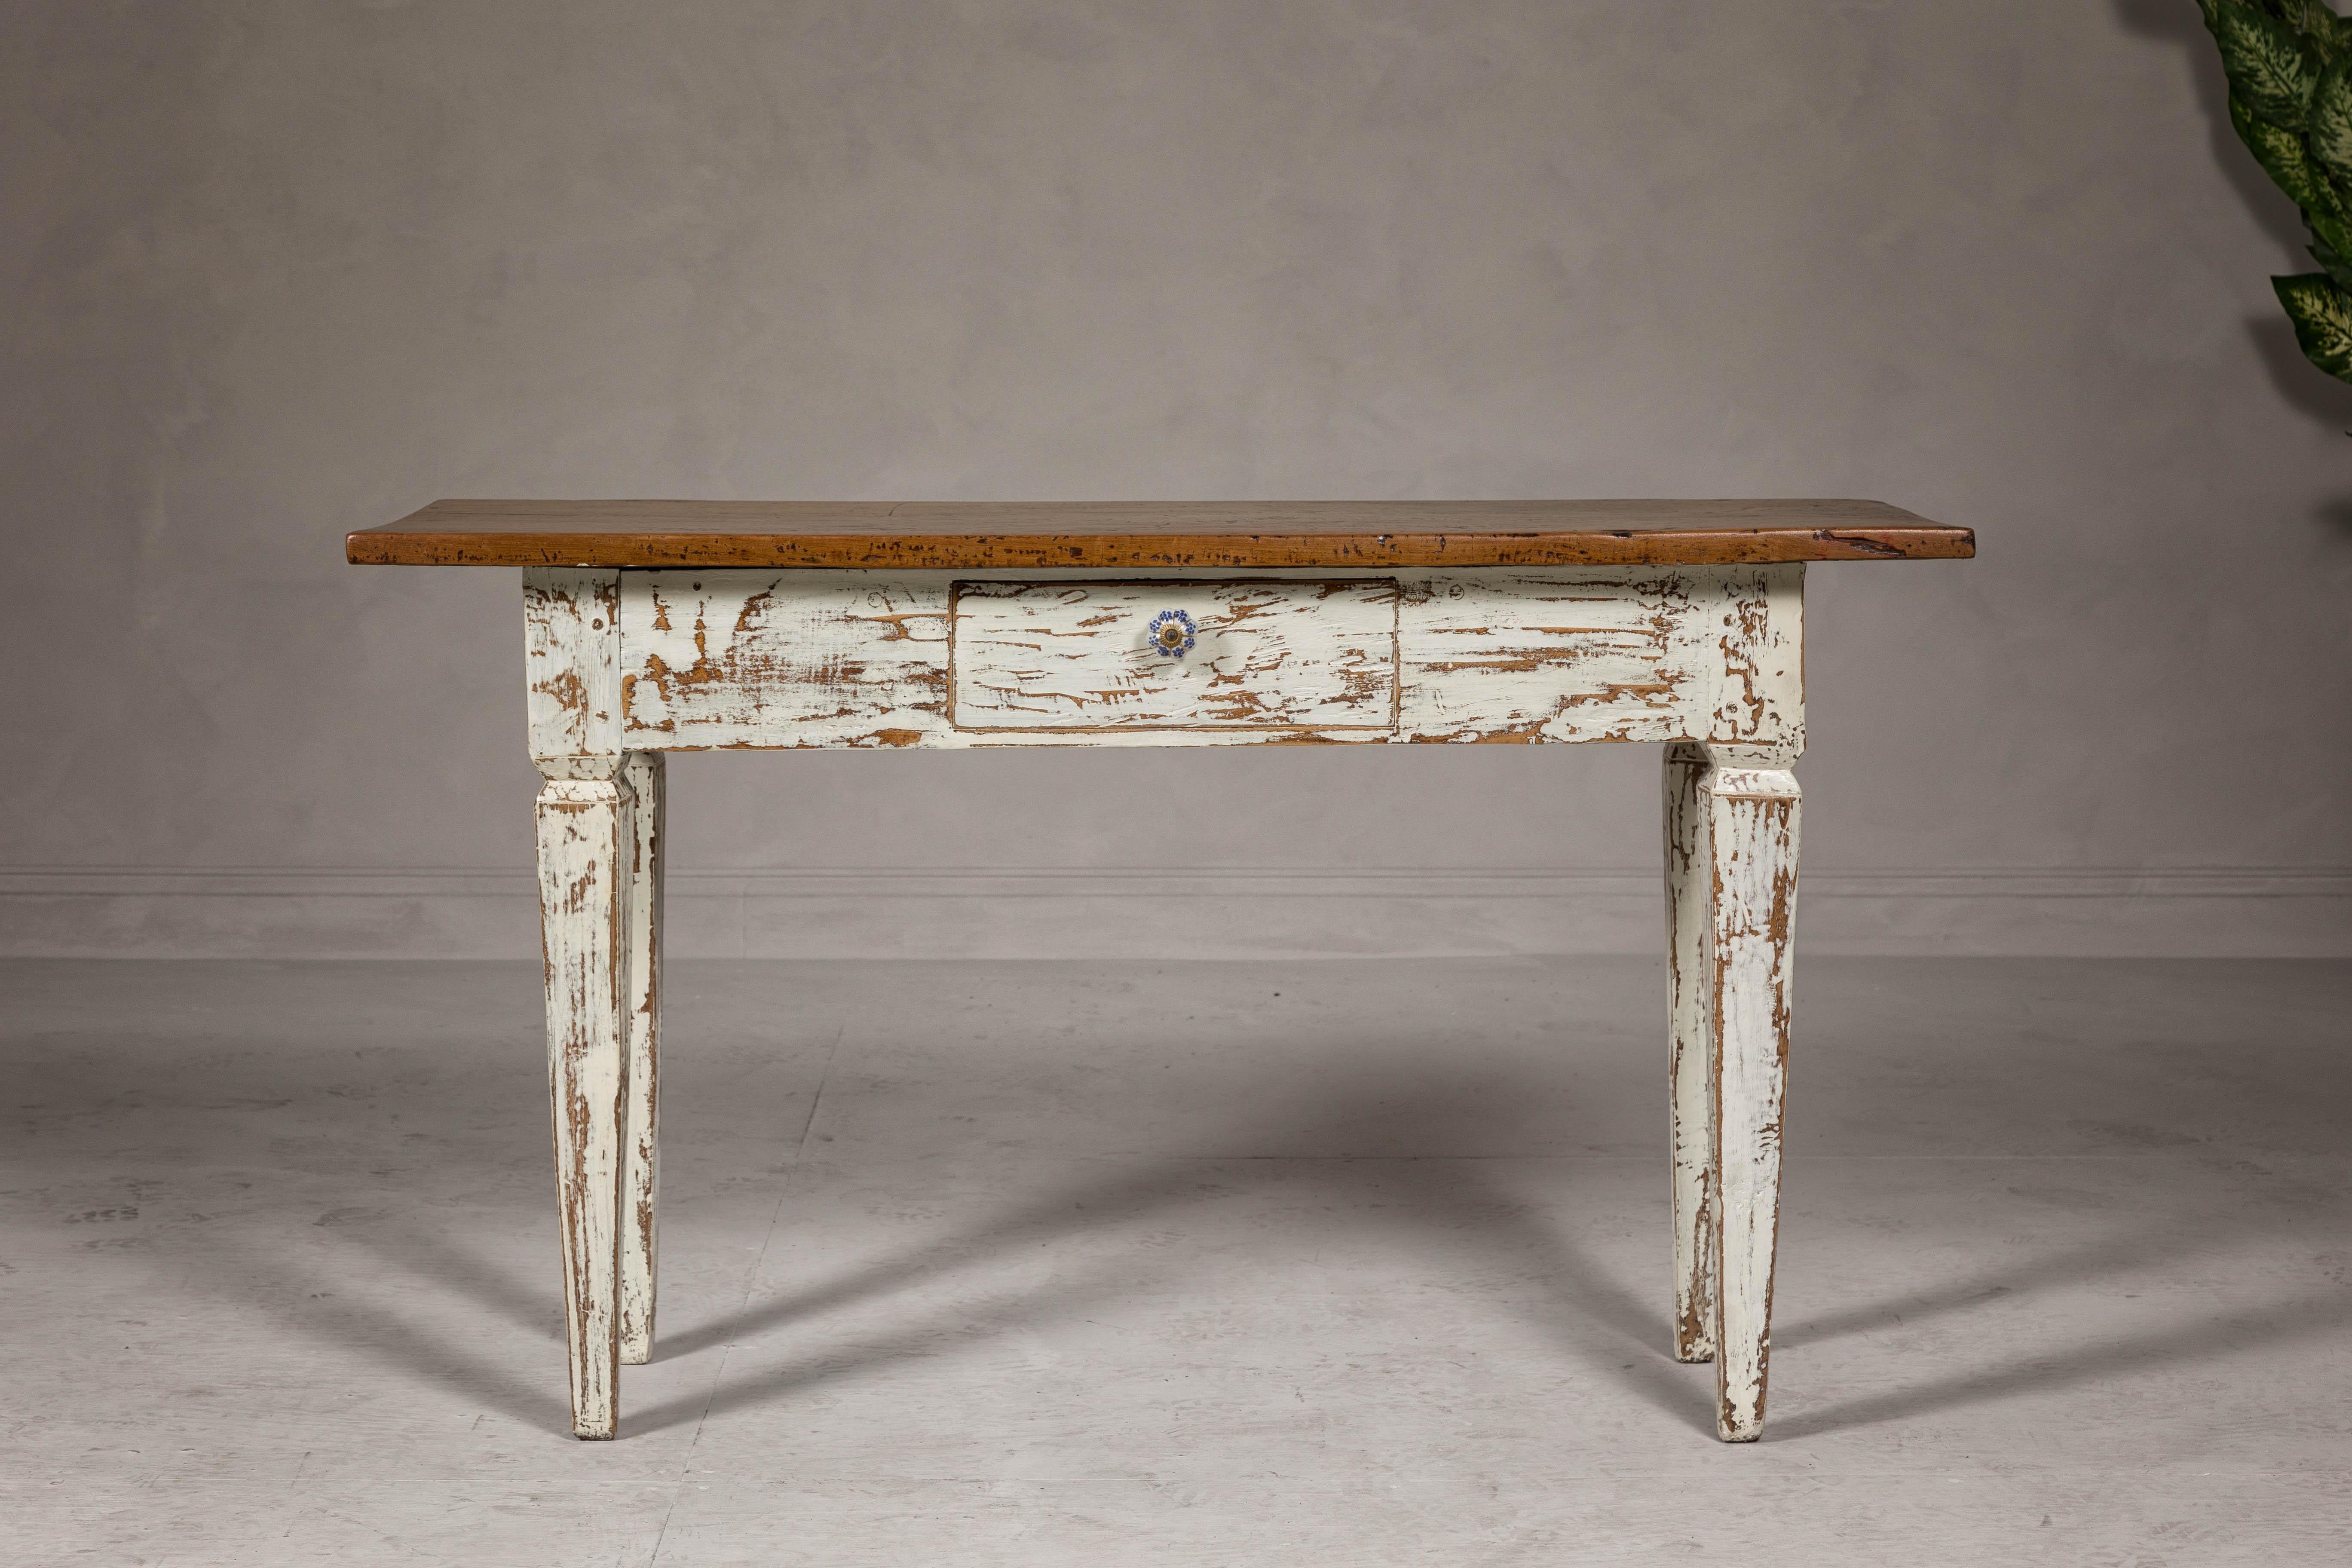 A Farmhouse chic country Neoclassical style sofa table with single drawer, distressed body and tapered legs. This farmhouse chic country Neoclassical style sofa table seamlessly blends rustic charm with elegant sophistication. A vintage piece that